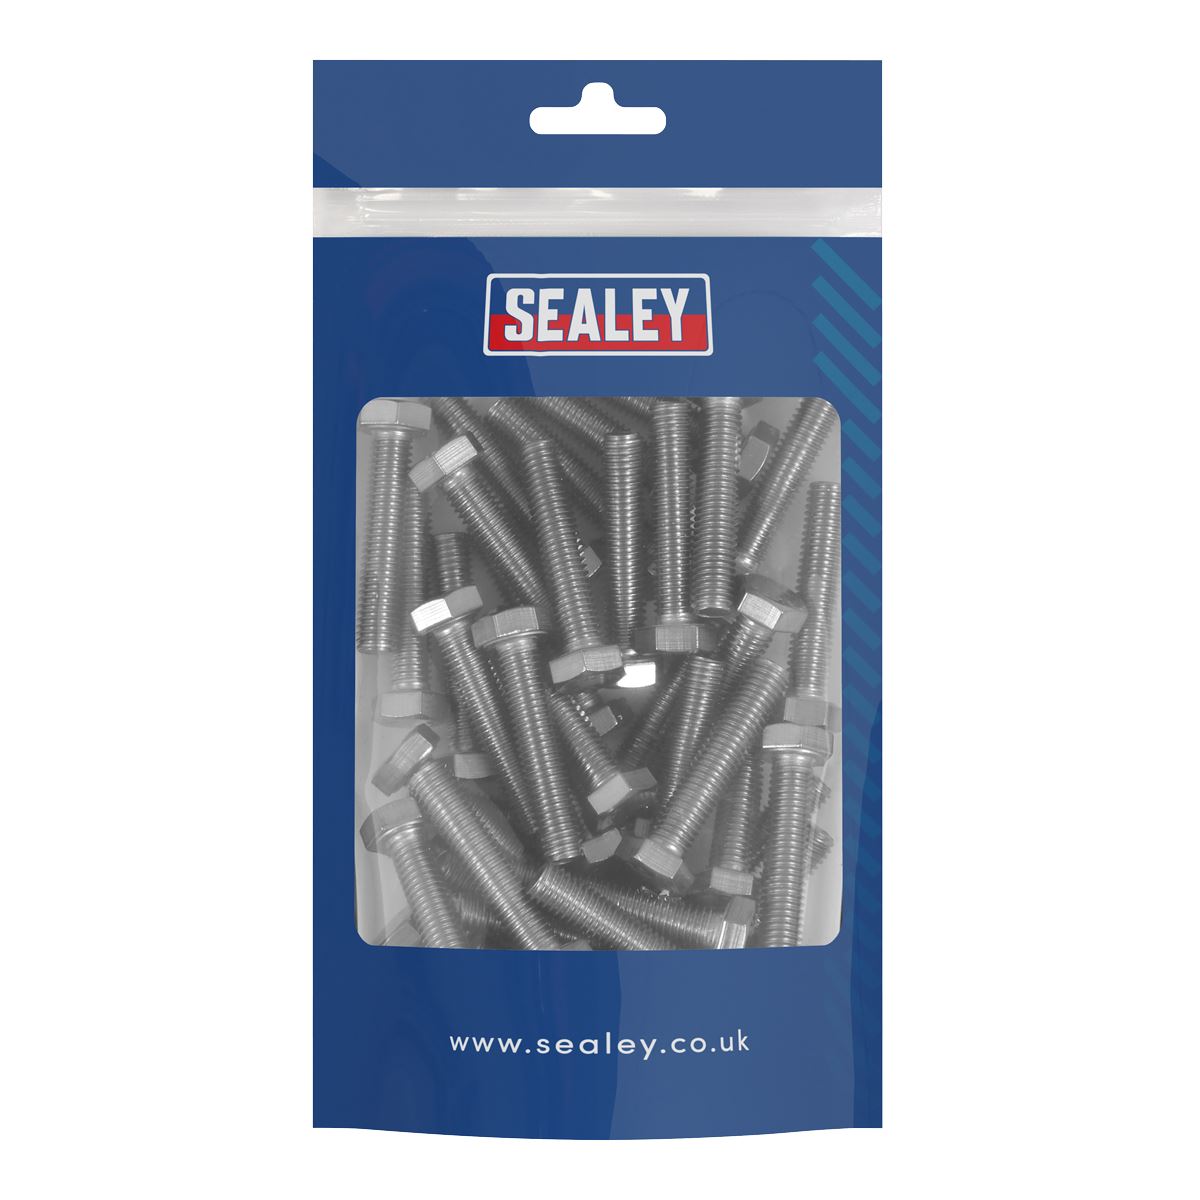 Sealey Stainless Steel Set Screw Din 933 – M8 x 1.25 pitch - Pack of 50